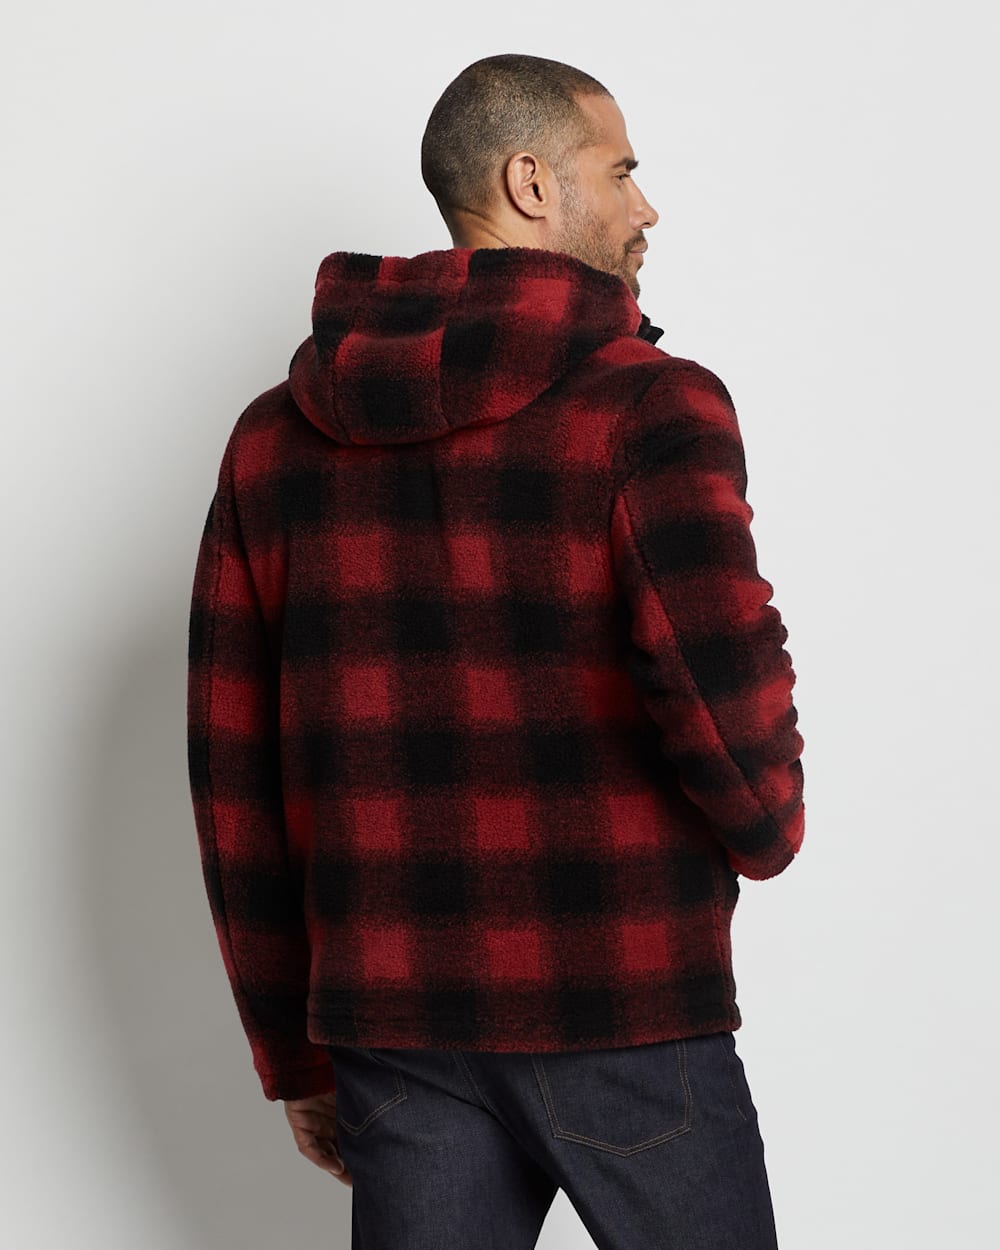 ALTERNATE VIEW OF MEN'S WOODSIDE HOODED FLEECE JACKET IN RED BUFFALO CHECK image number 5